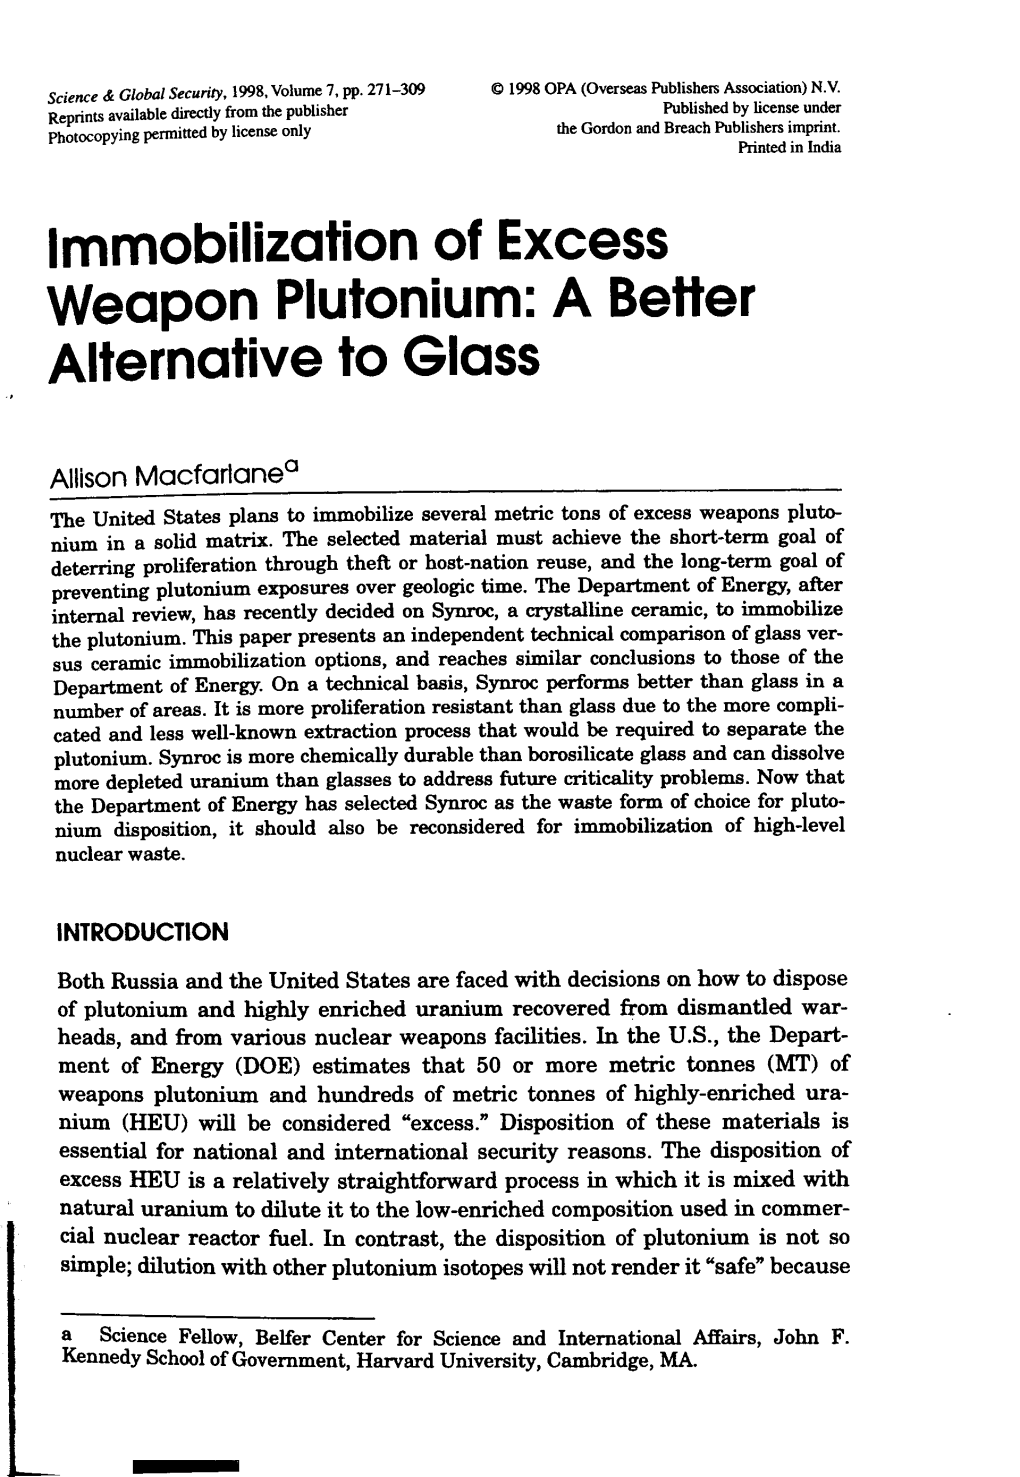 Immobilization of Excess Weapon Plutonium: a Better Alternative to Glass